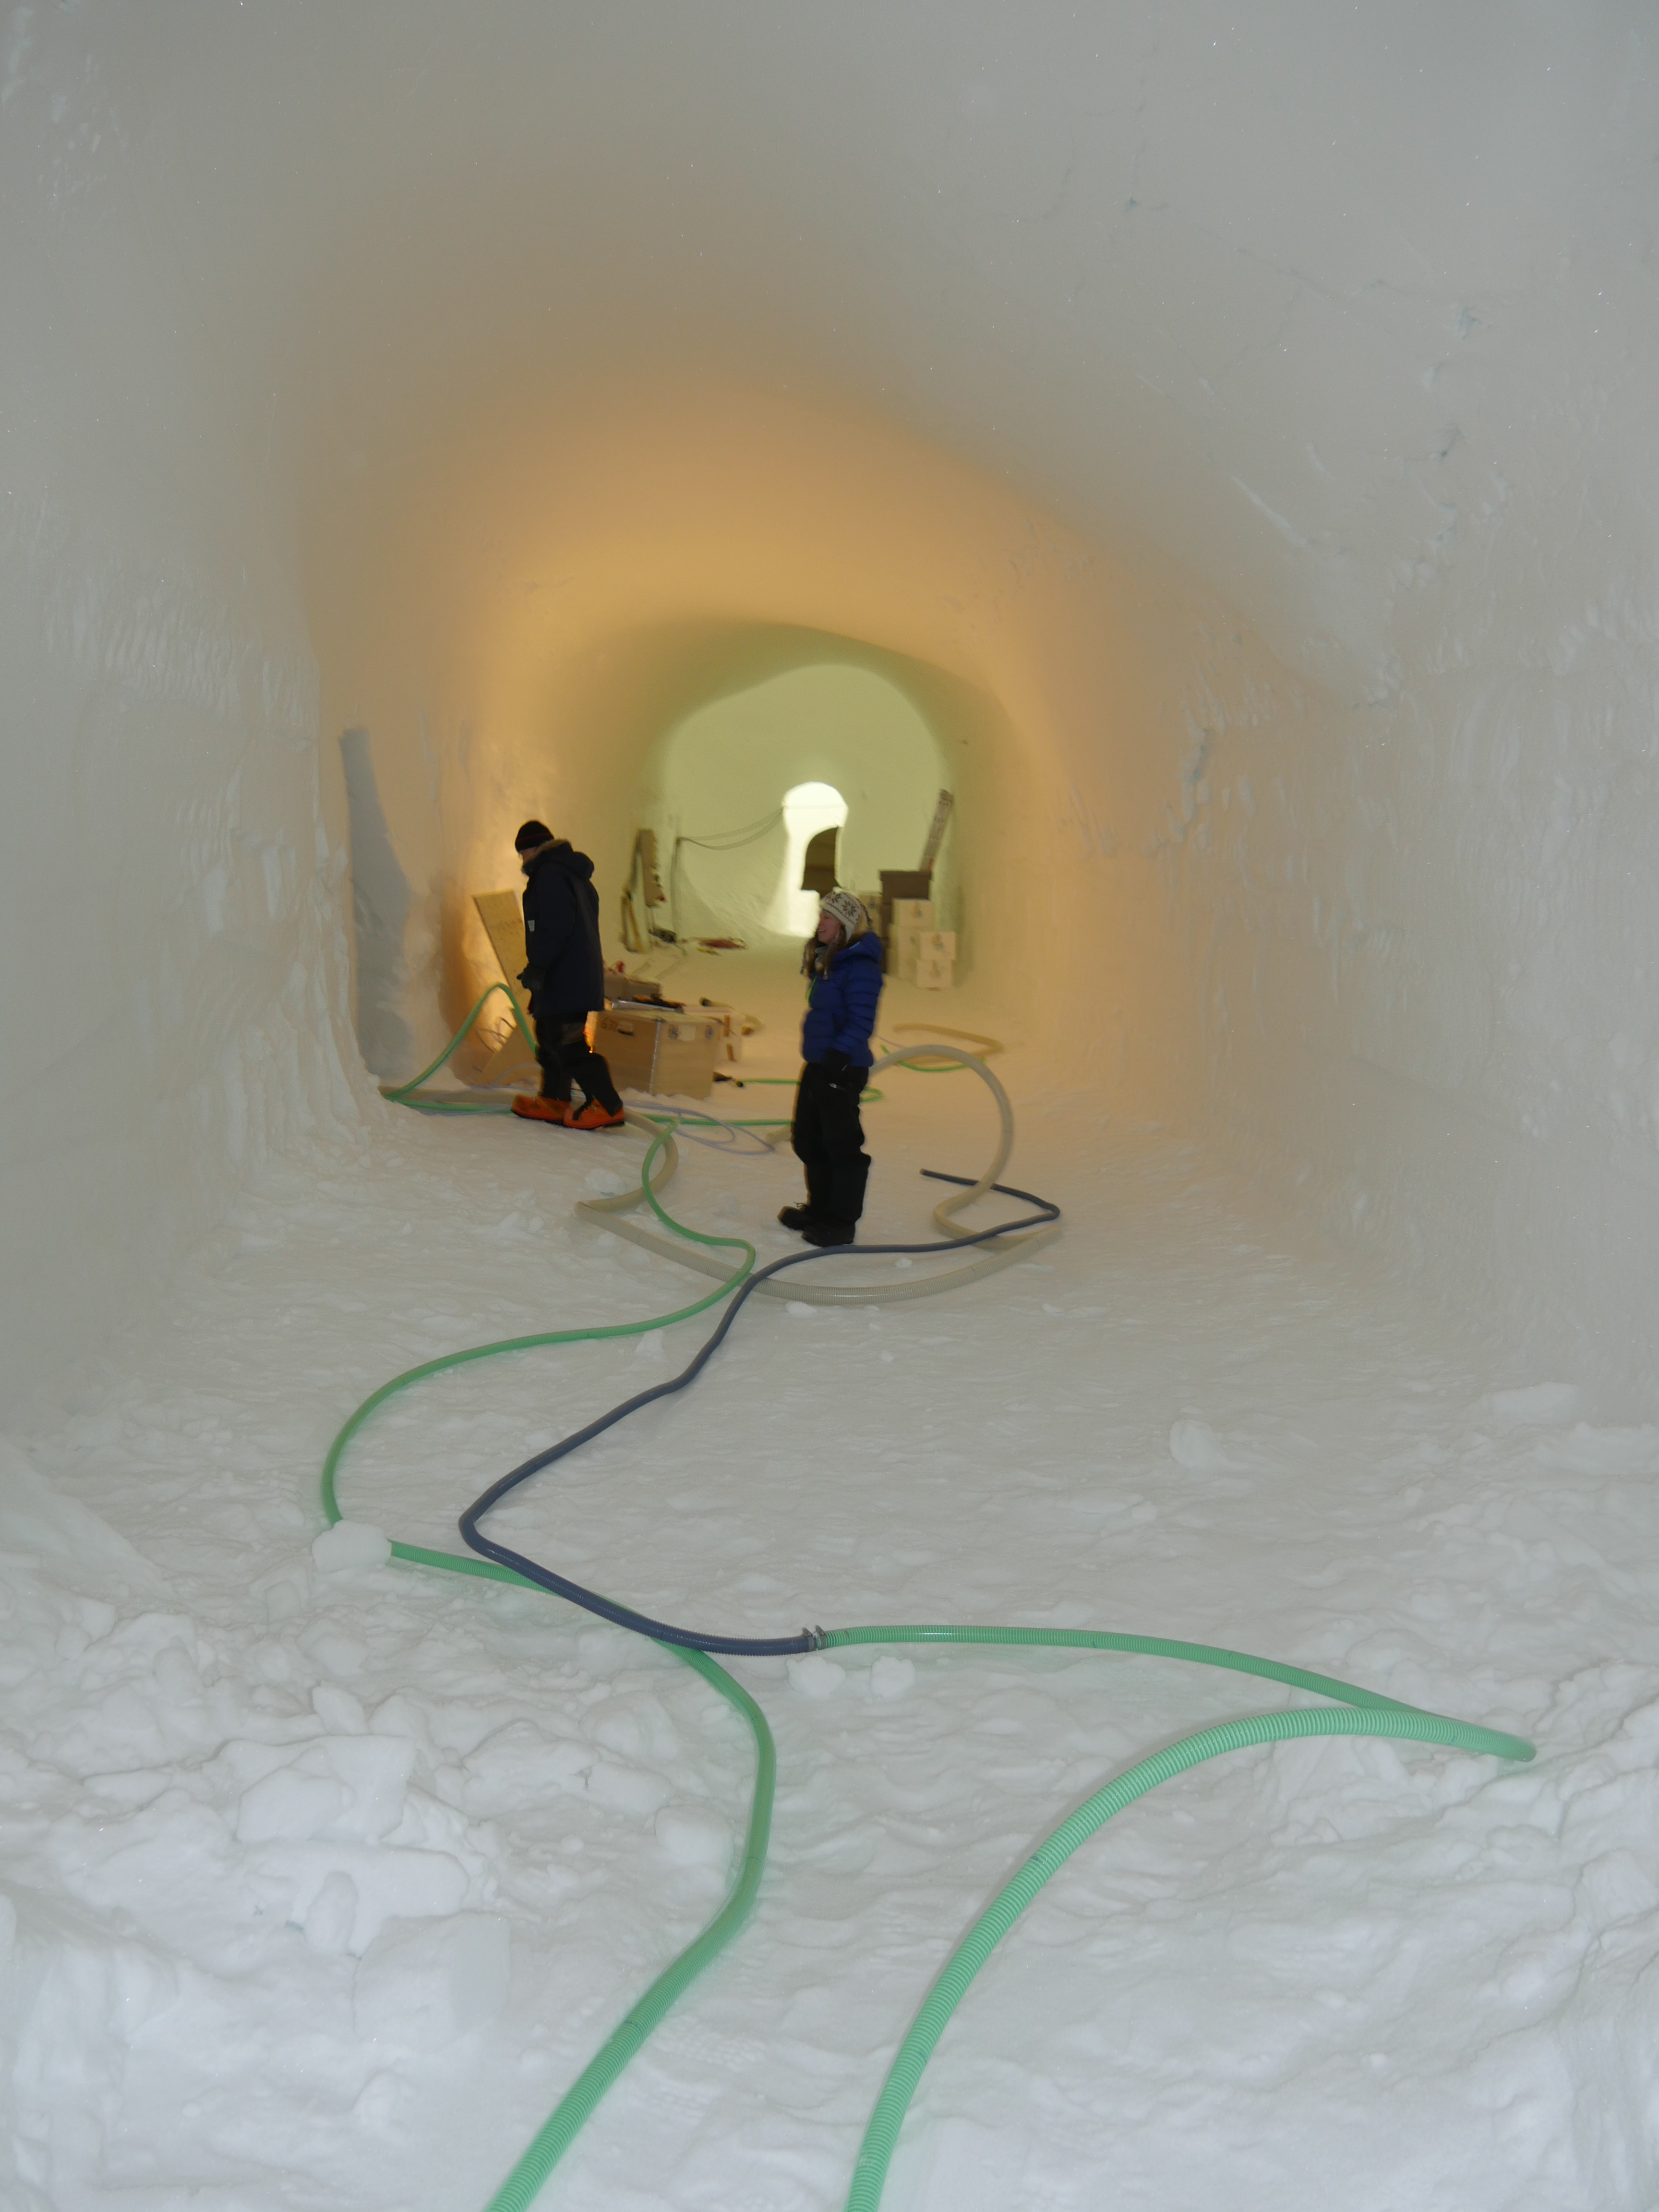 The underground network of tunnels is slowly taking shape.